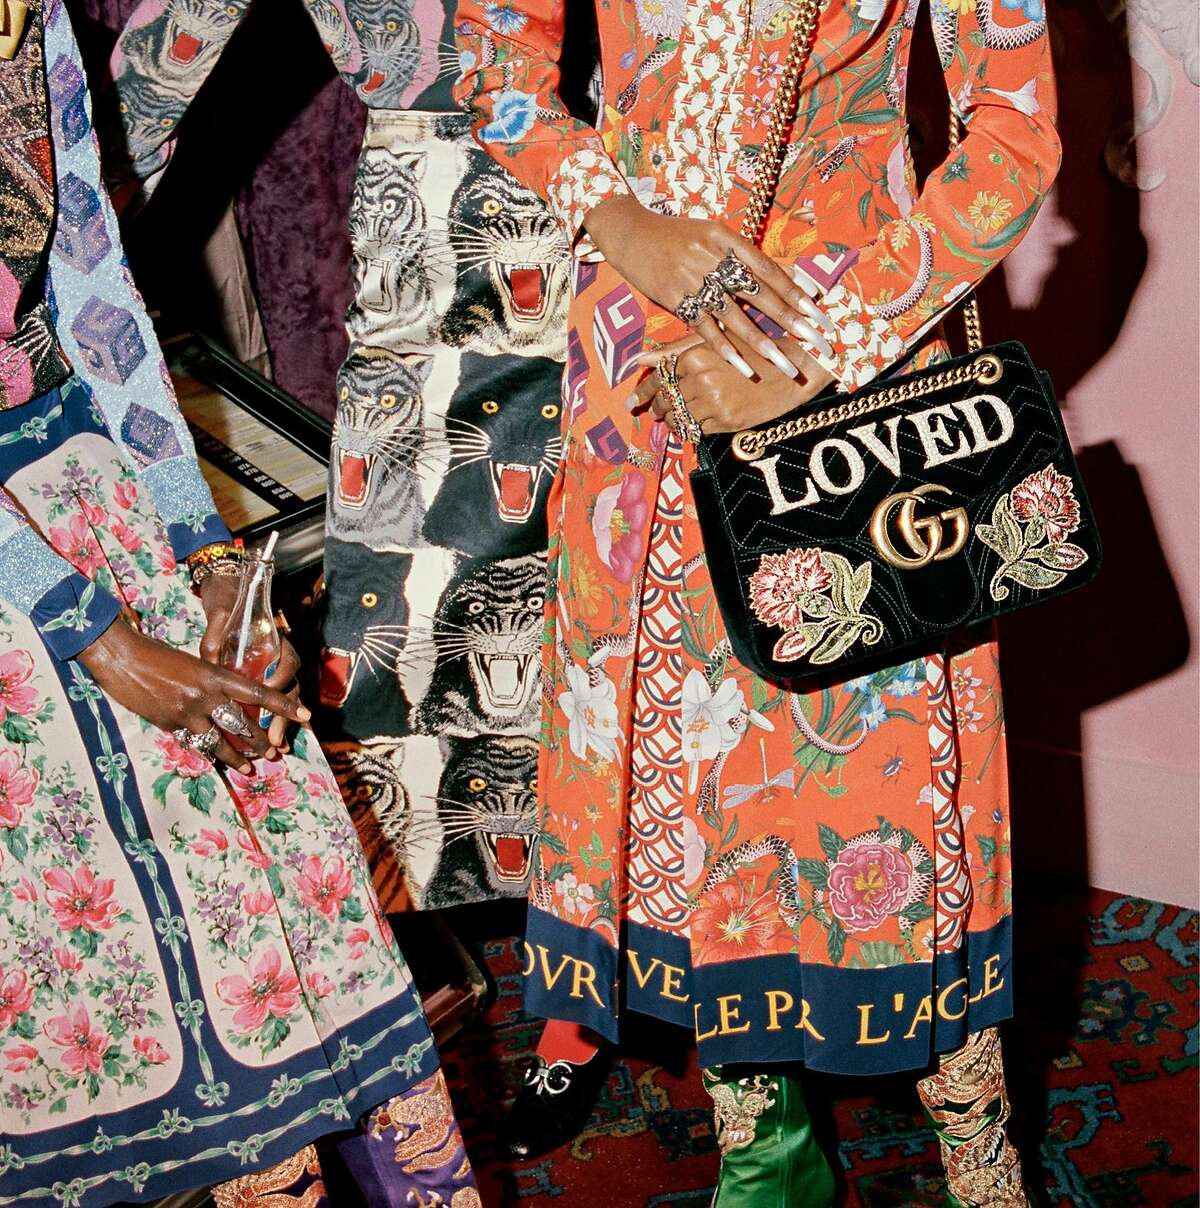 Gucci�s fall 2017 campaign has got the moves: The �Soul Scene� shoot by Glen Luchford showcases the idiosyncratic, over-the-top fashions of Gucci creative director Alessandro Michele features a mix of models and dancers kicking their heels up in the maximalist looks.